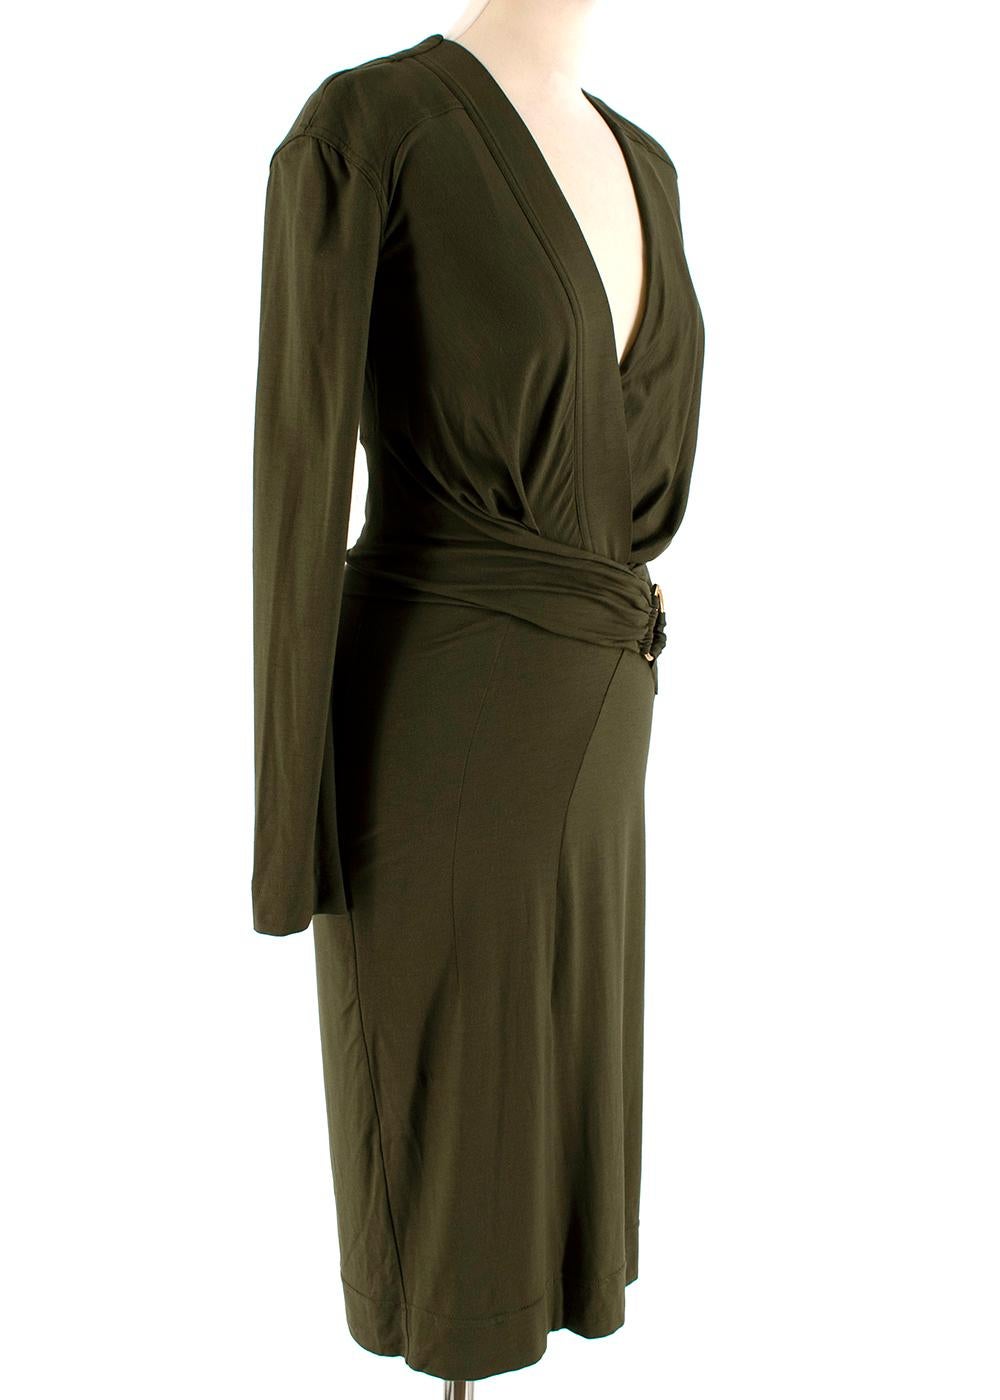 Tom Ford Khaki Plunge Neck D-Ring Wrap Style Dress

- Khaki midi dress
- Stretchy mid-weight material
- Loose fitting
- Plunge crossover neckline 
- Long sleeves 
- D-ring waist belt 
- Side zip fastening 

Materials: 
95% Viscose, 5% Elastane 

Dry